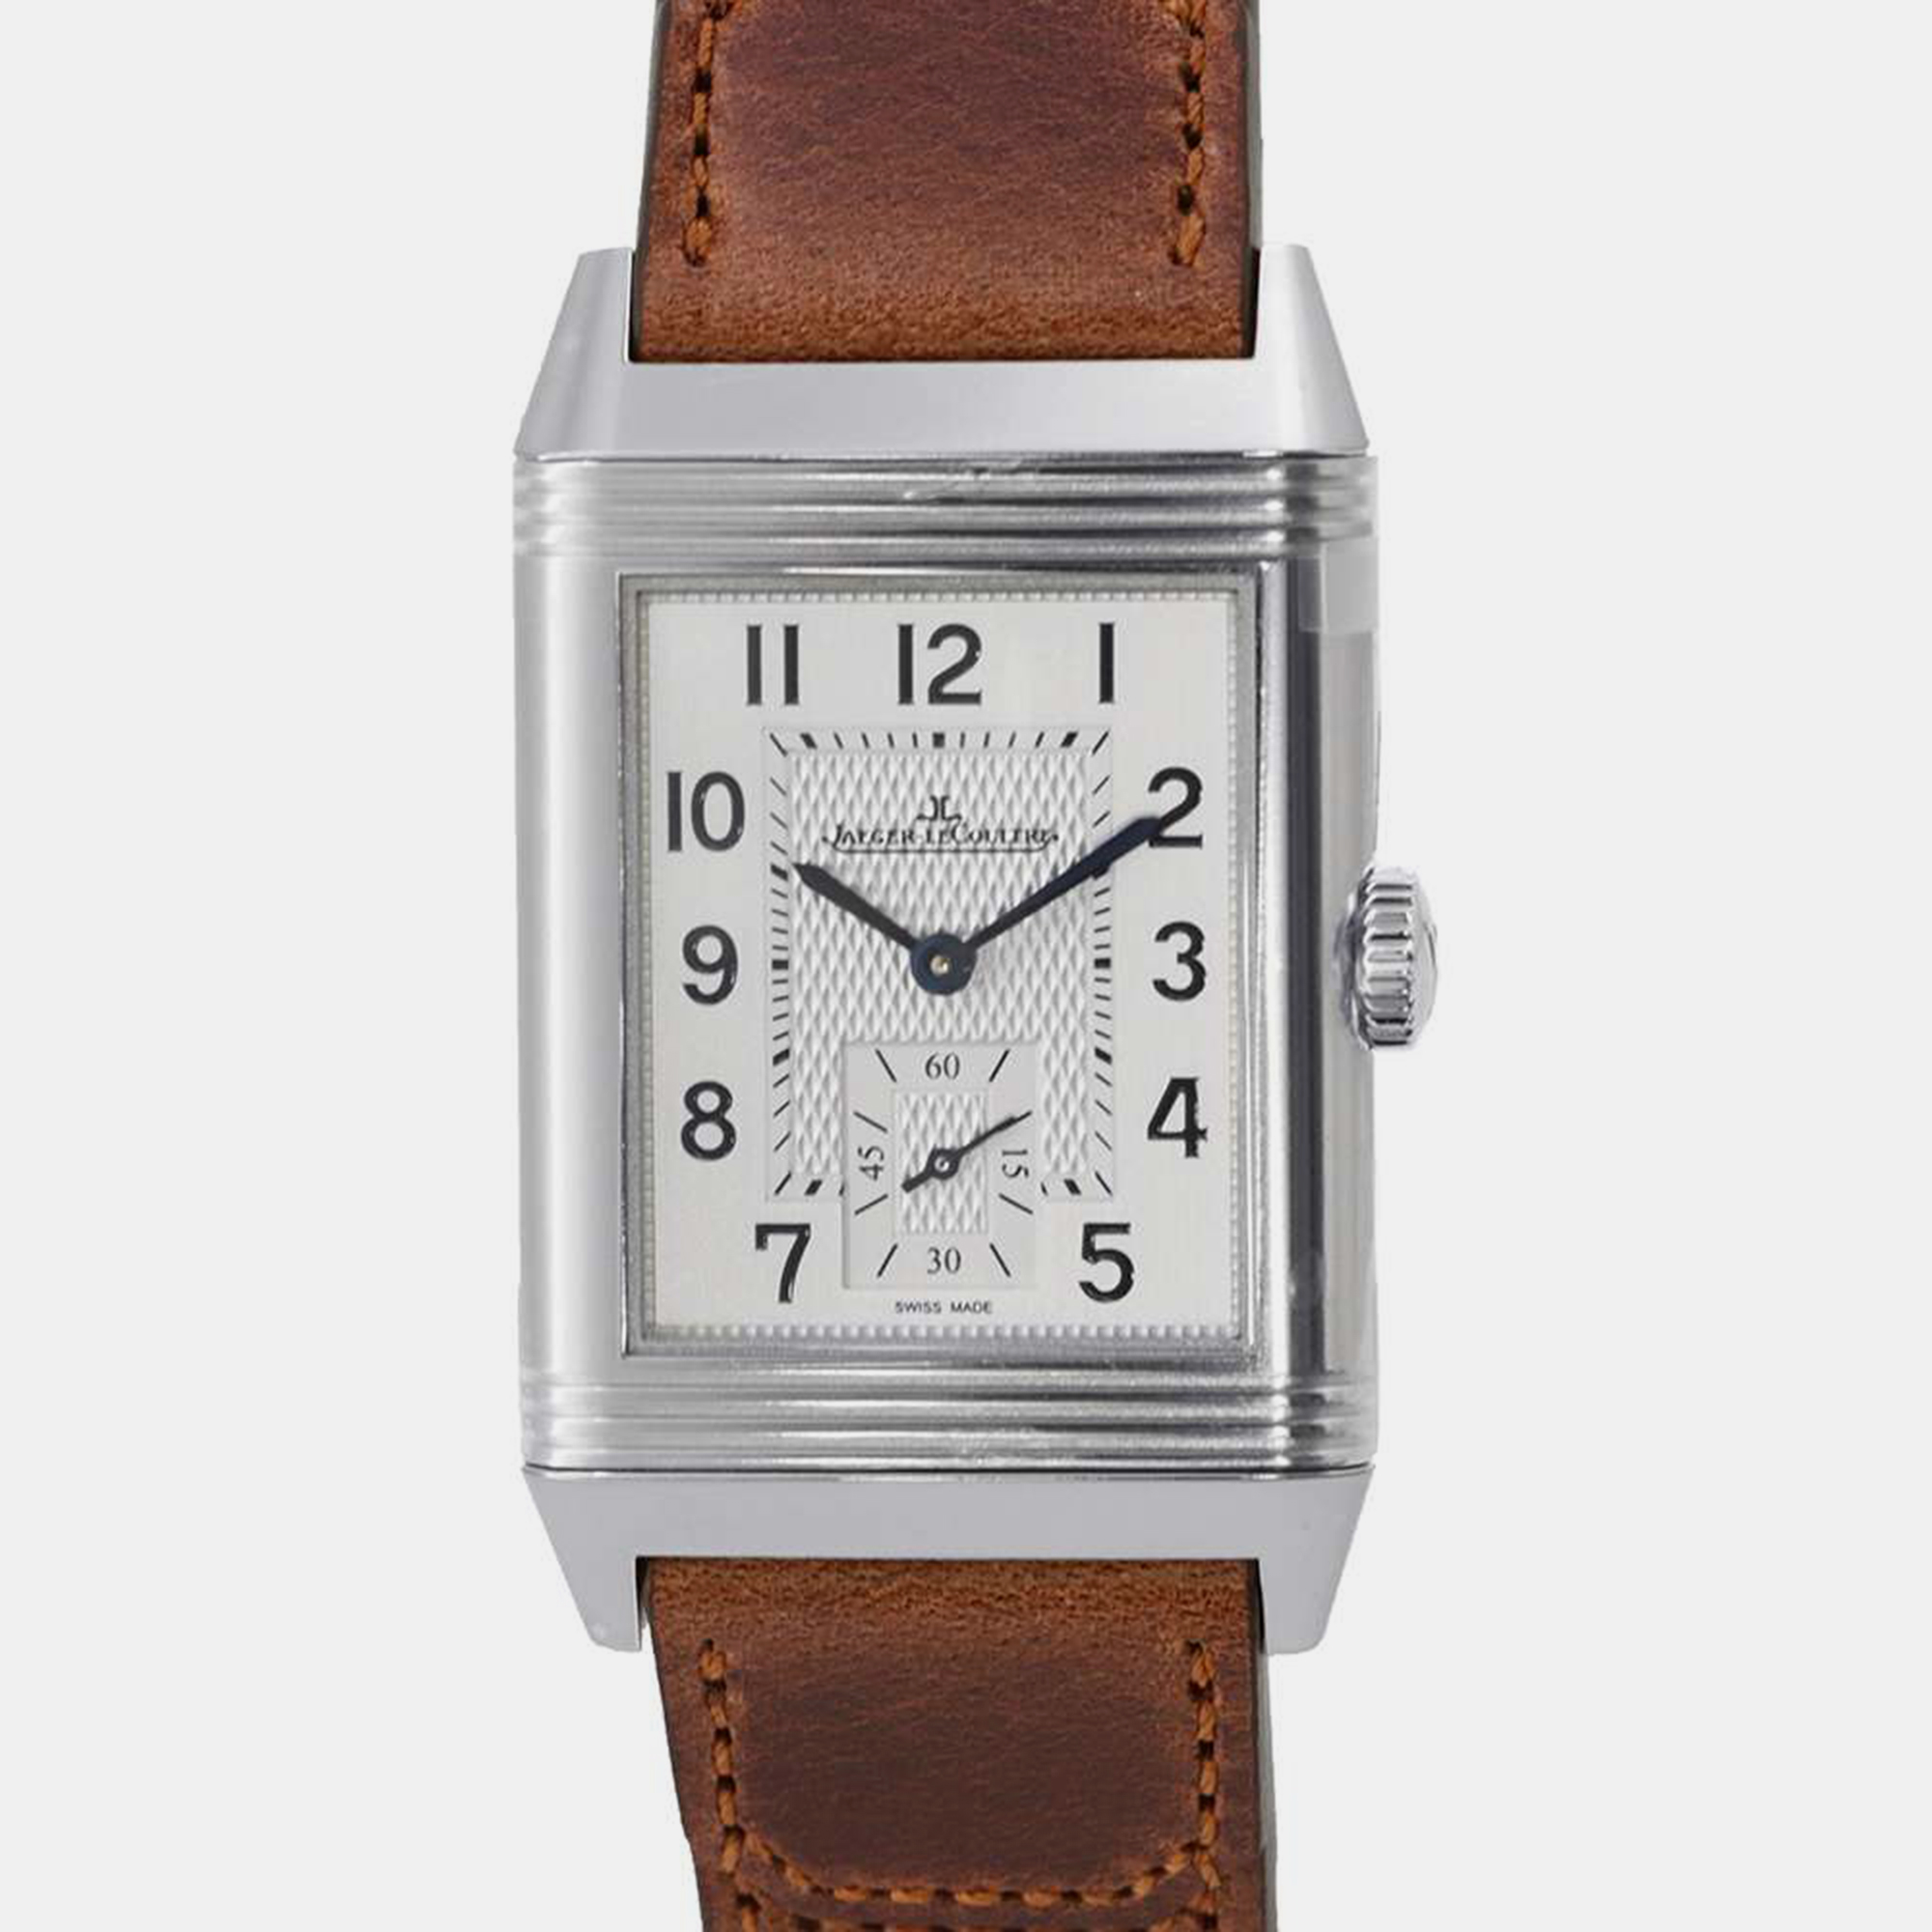 This authentic Jaeger Le Coultre watch is characterized by skillful craftsmanship and understated charm. Meticulously constructed to tell time in an elegant way it comes in a sturdy case and flaunts a seamless blend of innovative design and flawless style.